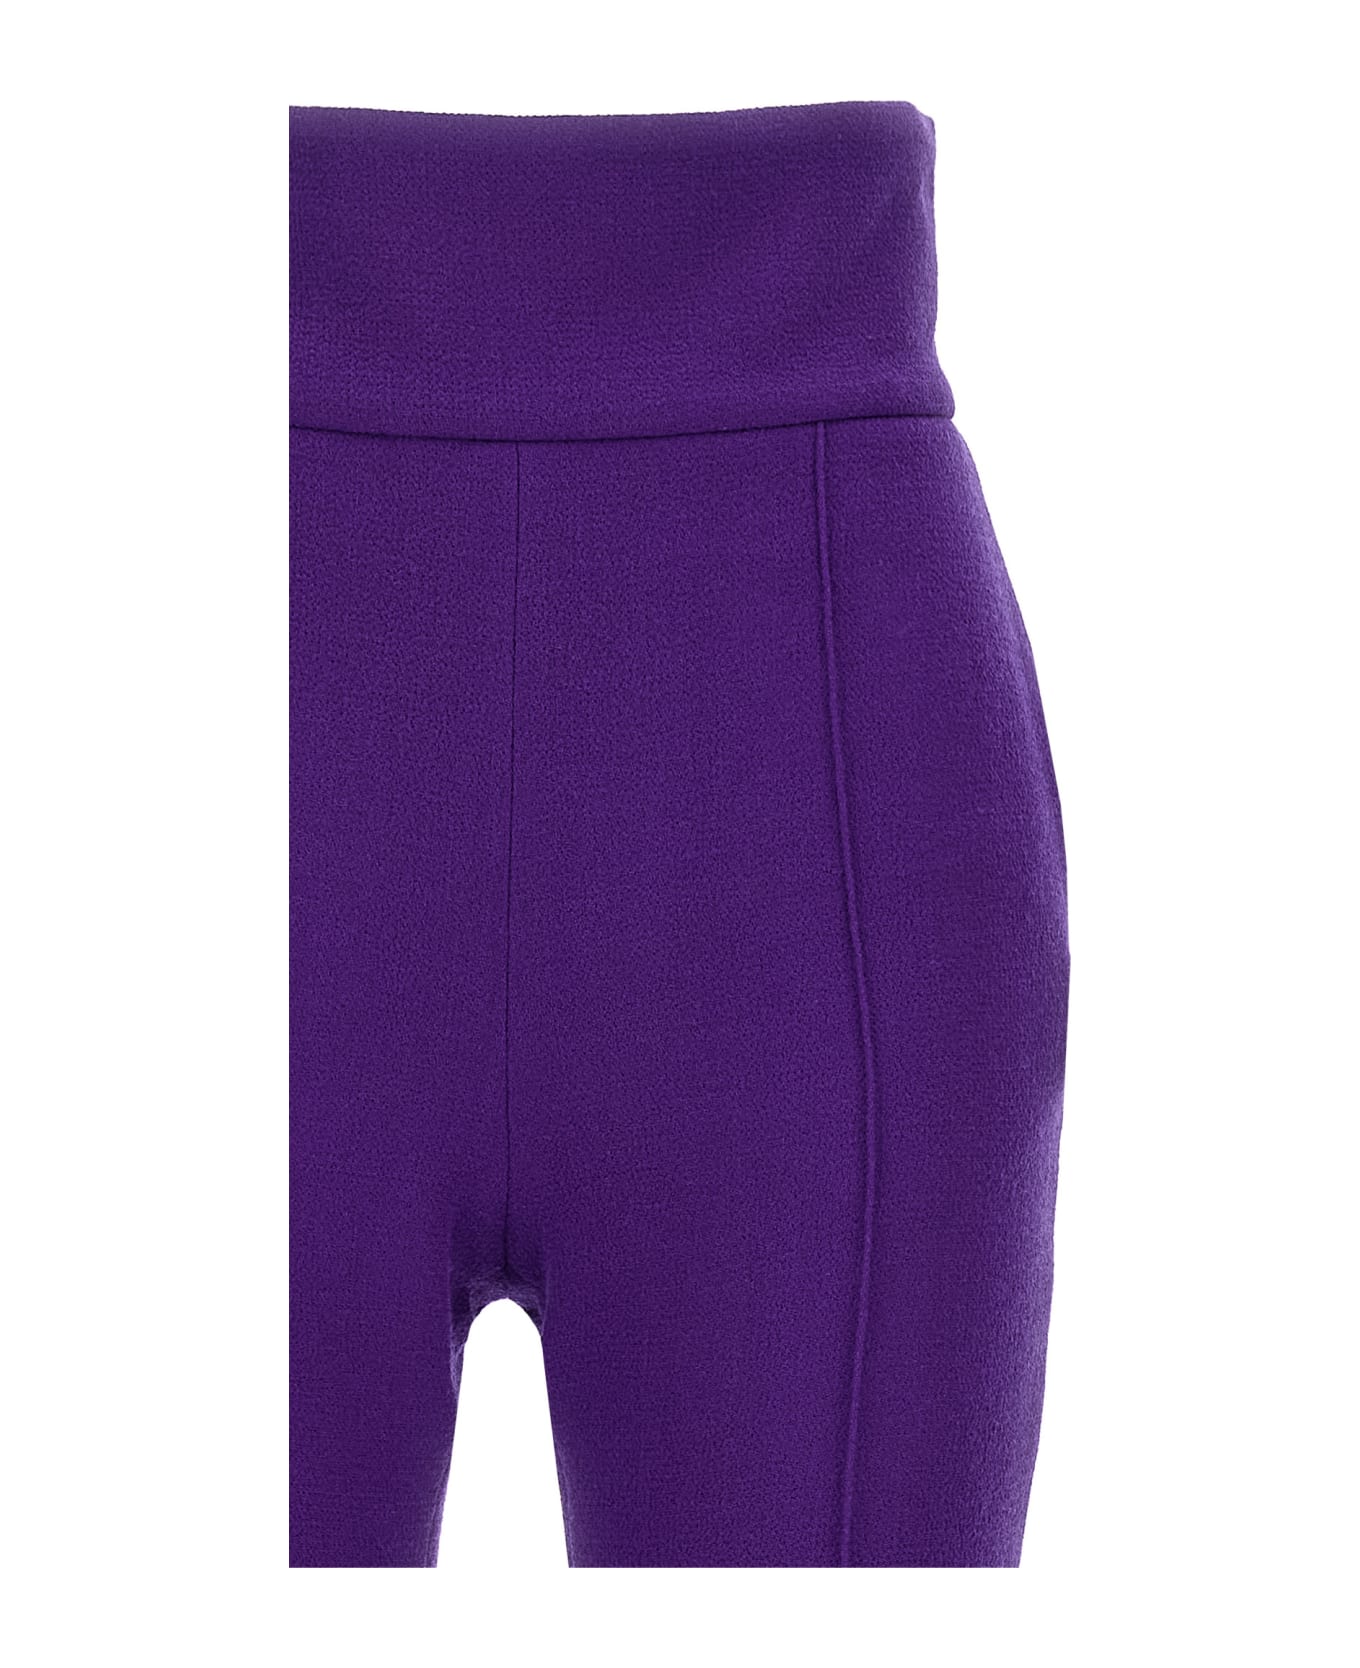 Alexandre Vauthier Tailored Trousers - Purple ボトムス